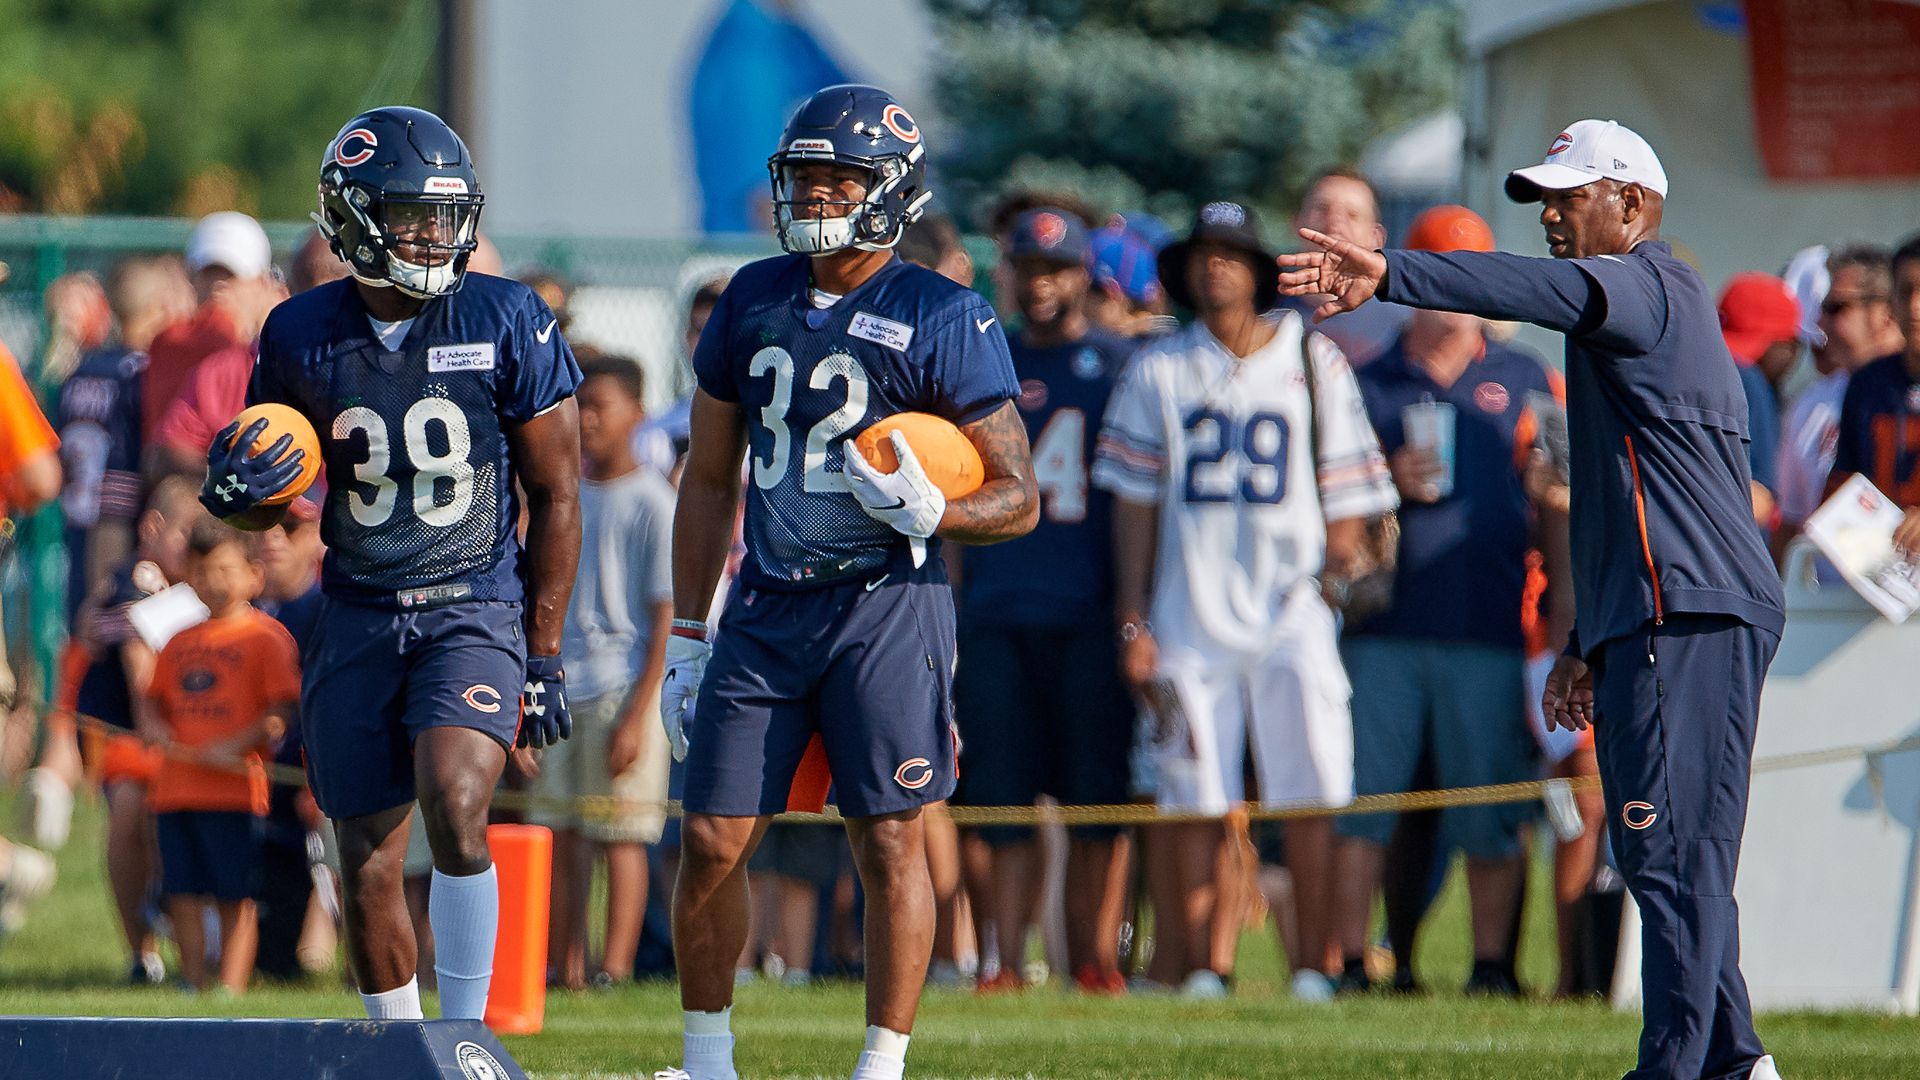 Chicago Bears players at training camp